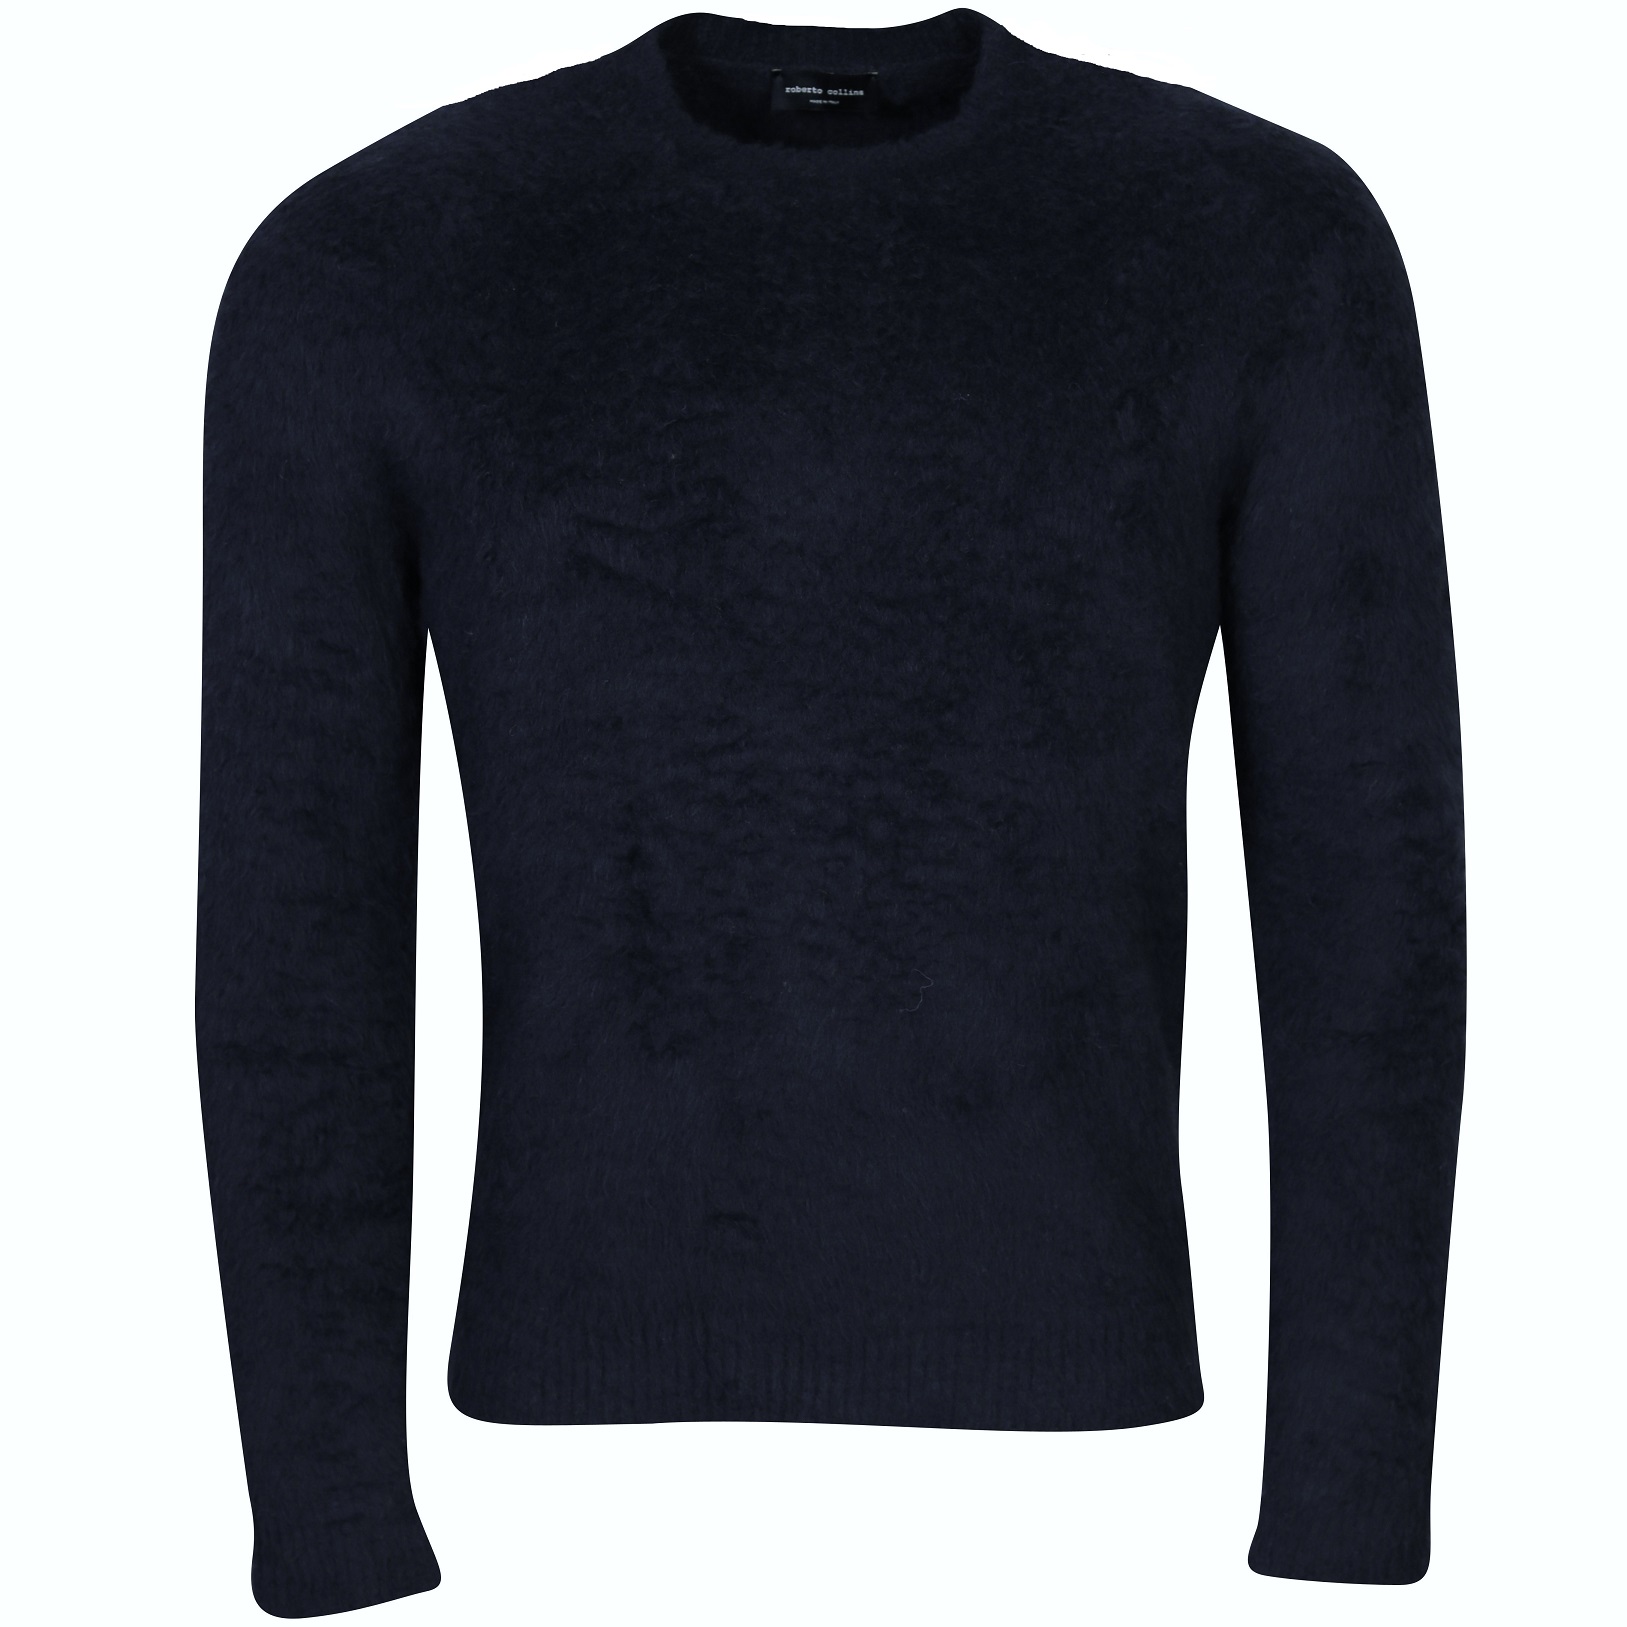 ROBERTO COLLINA Fluffy Cotton Knit Pullover in Navy